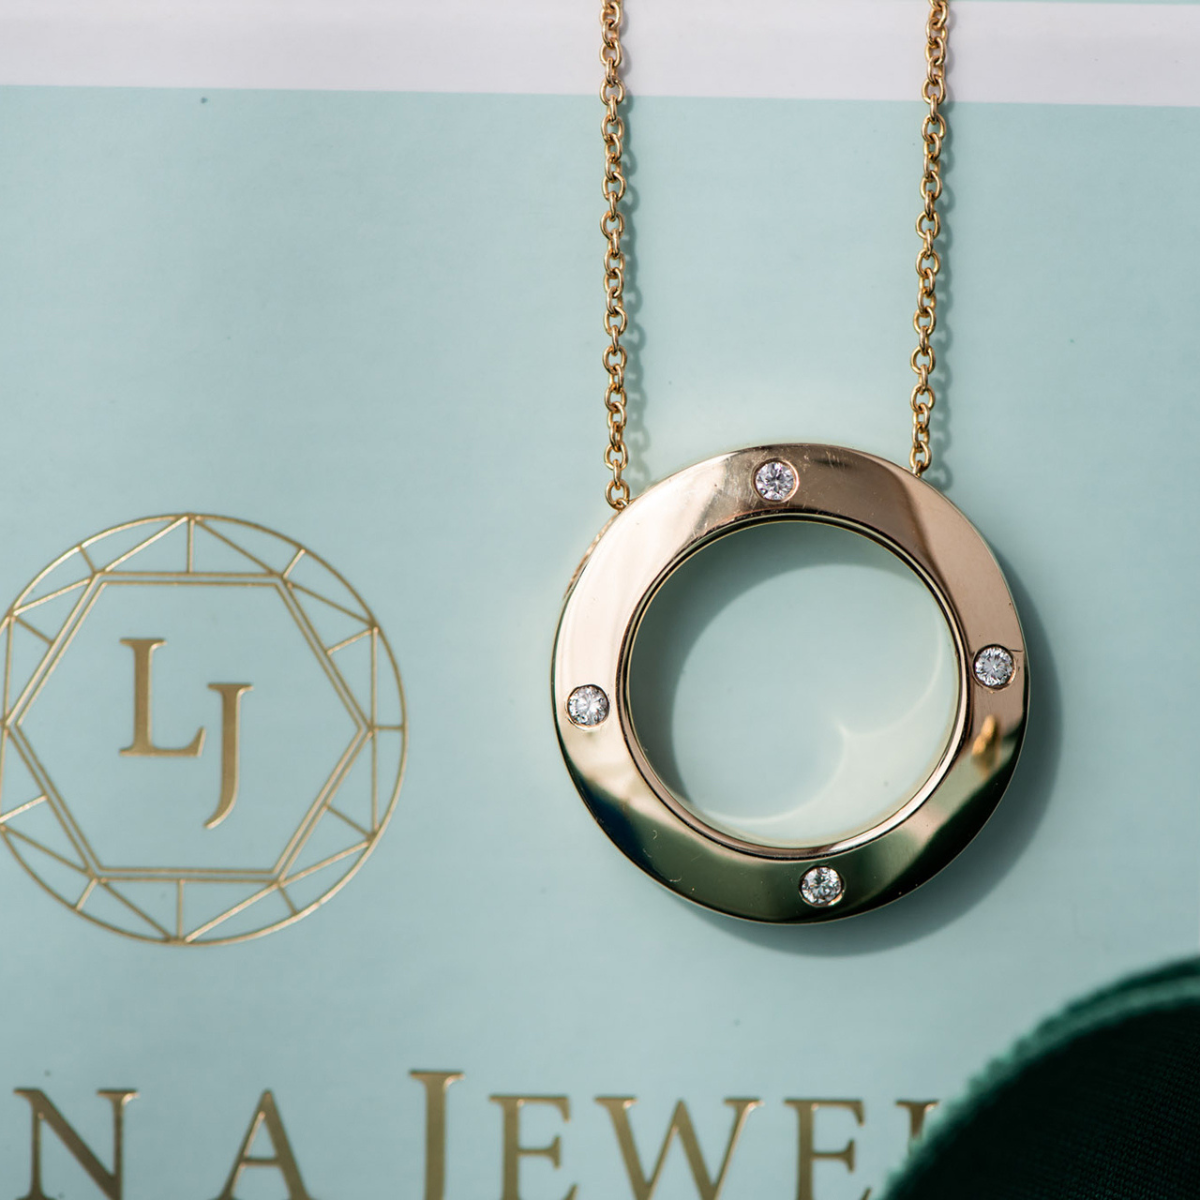 The Circle of Love Pendant